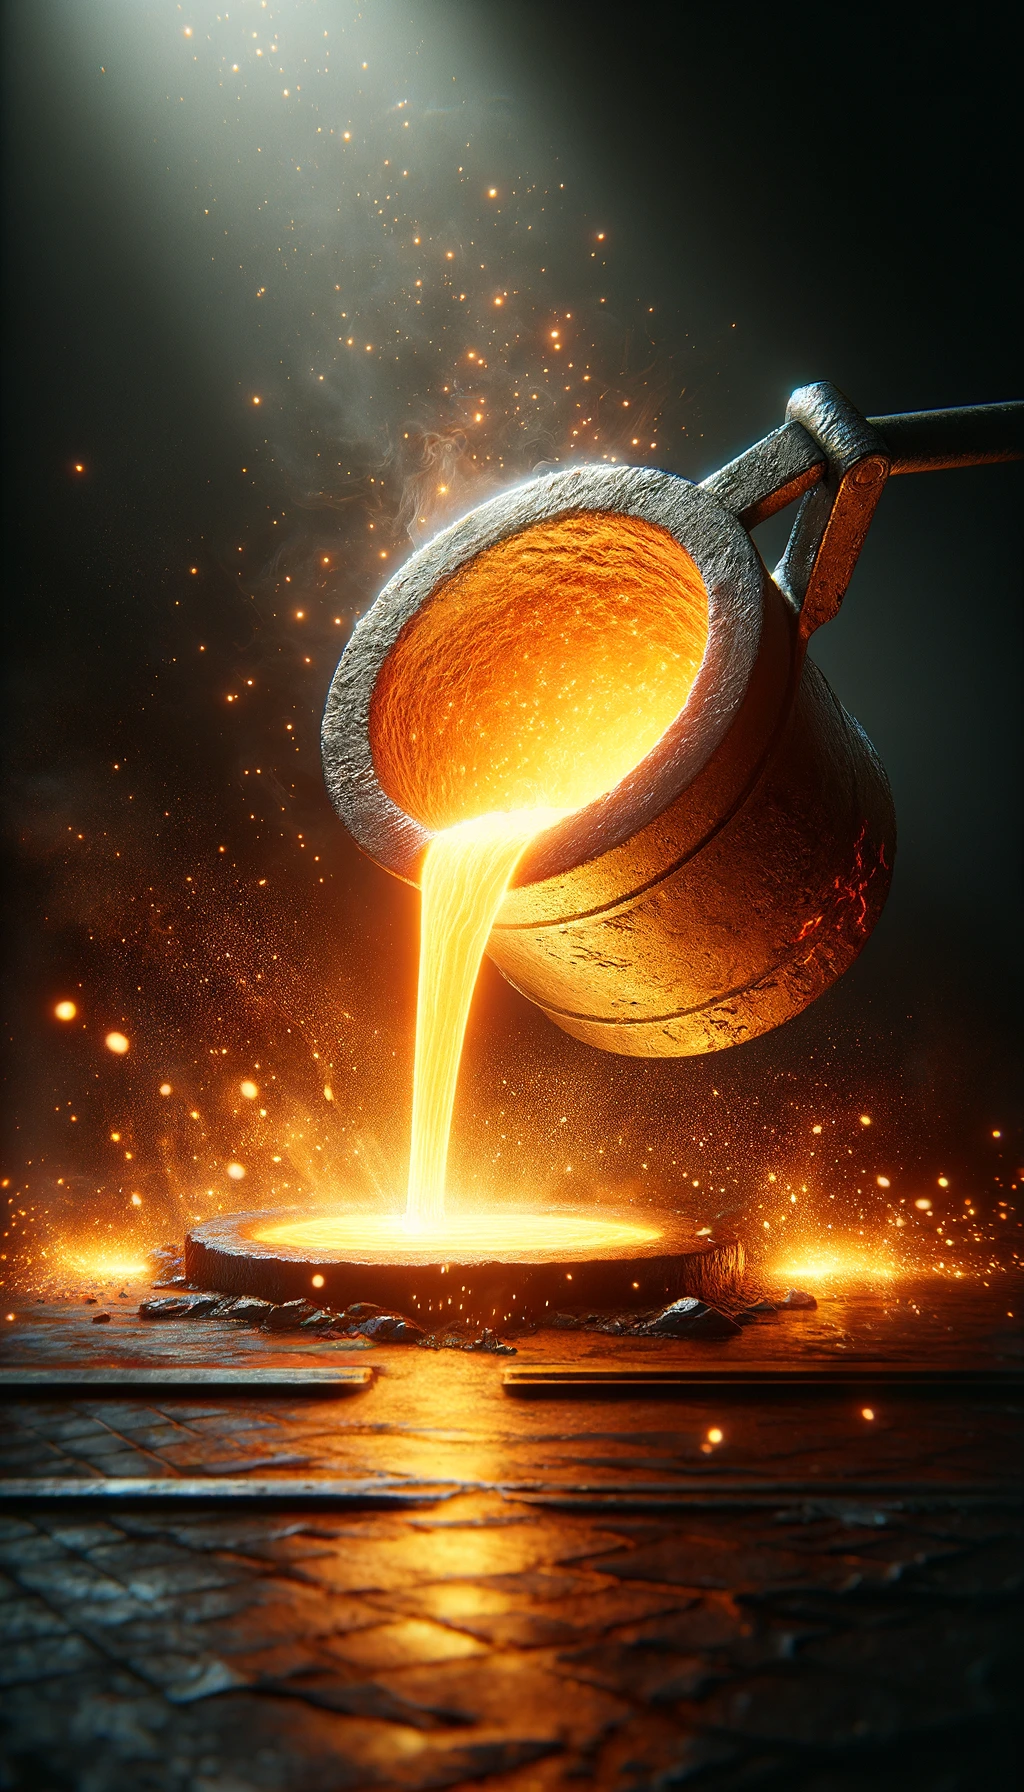 investment casting pouring